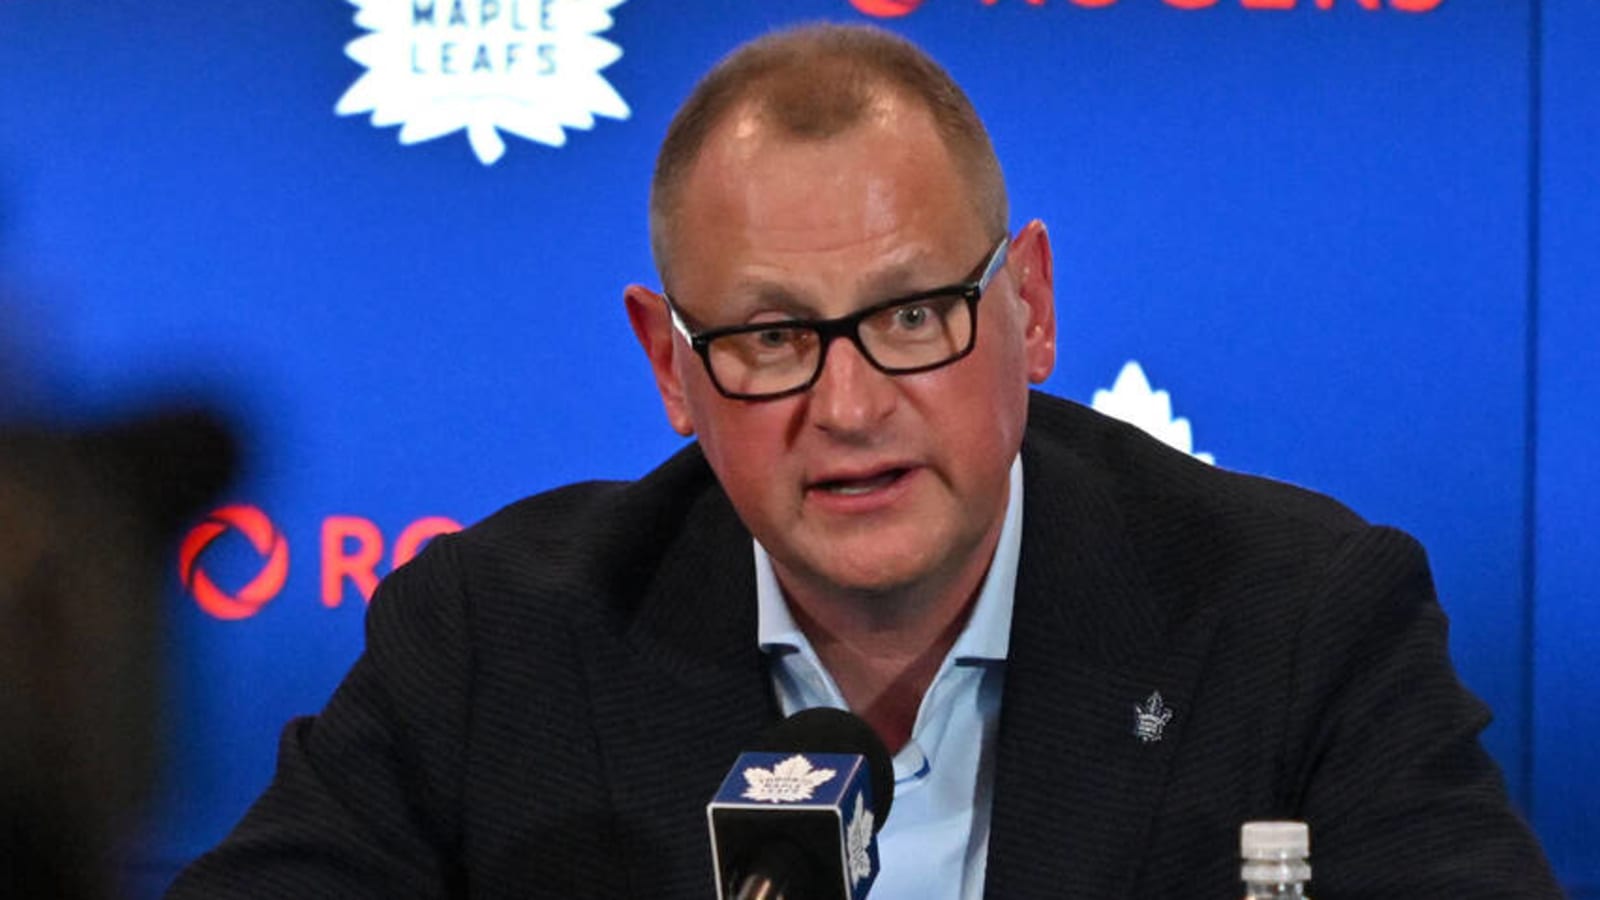 Is Brad Treliving the Right Person to Lead the Maple Leafs?